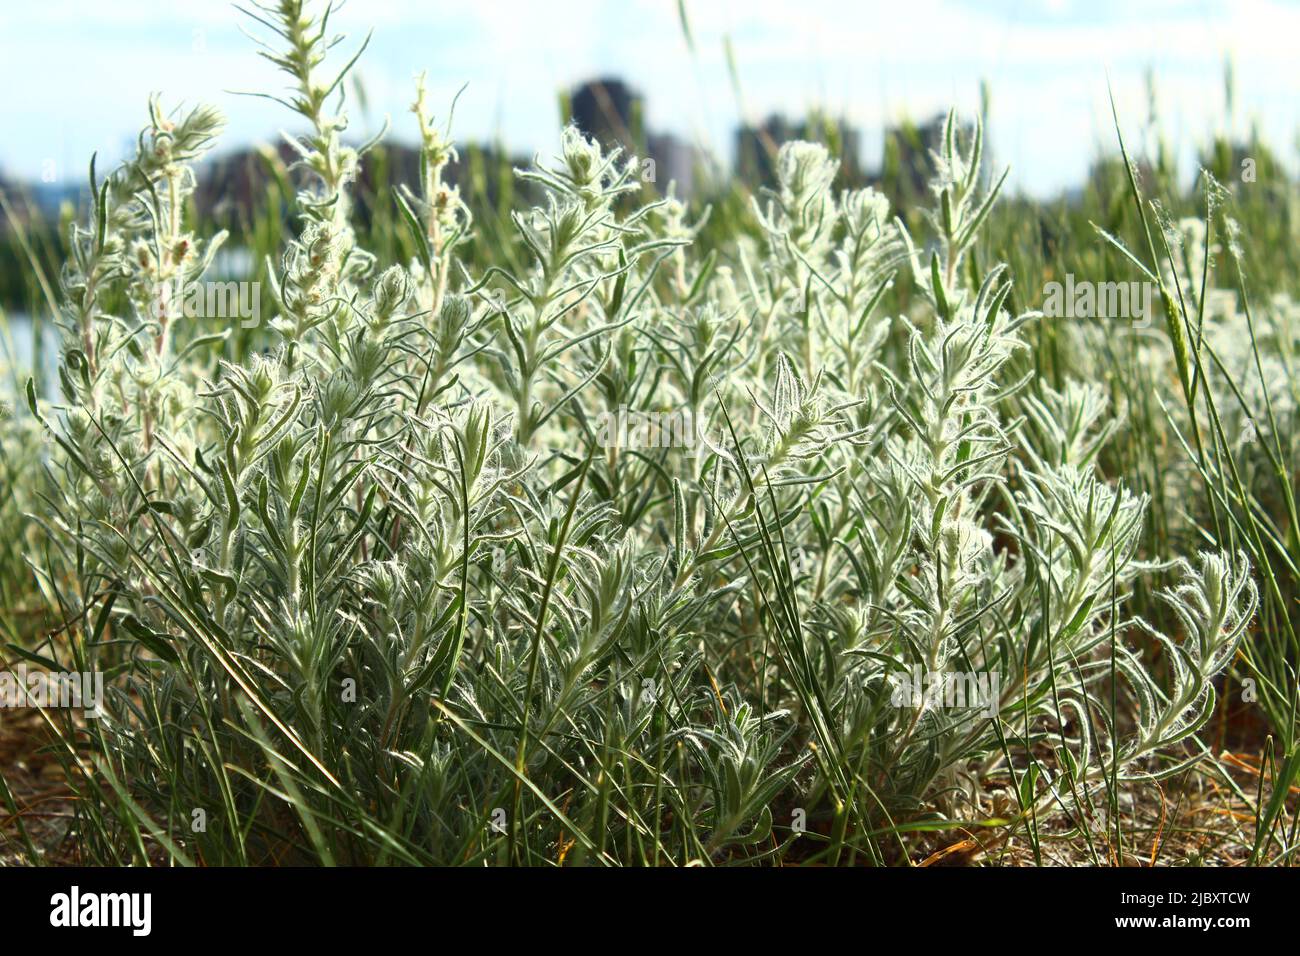 Winterfat plant in late spring covered in white fluff with building in the background Stock Photo